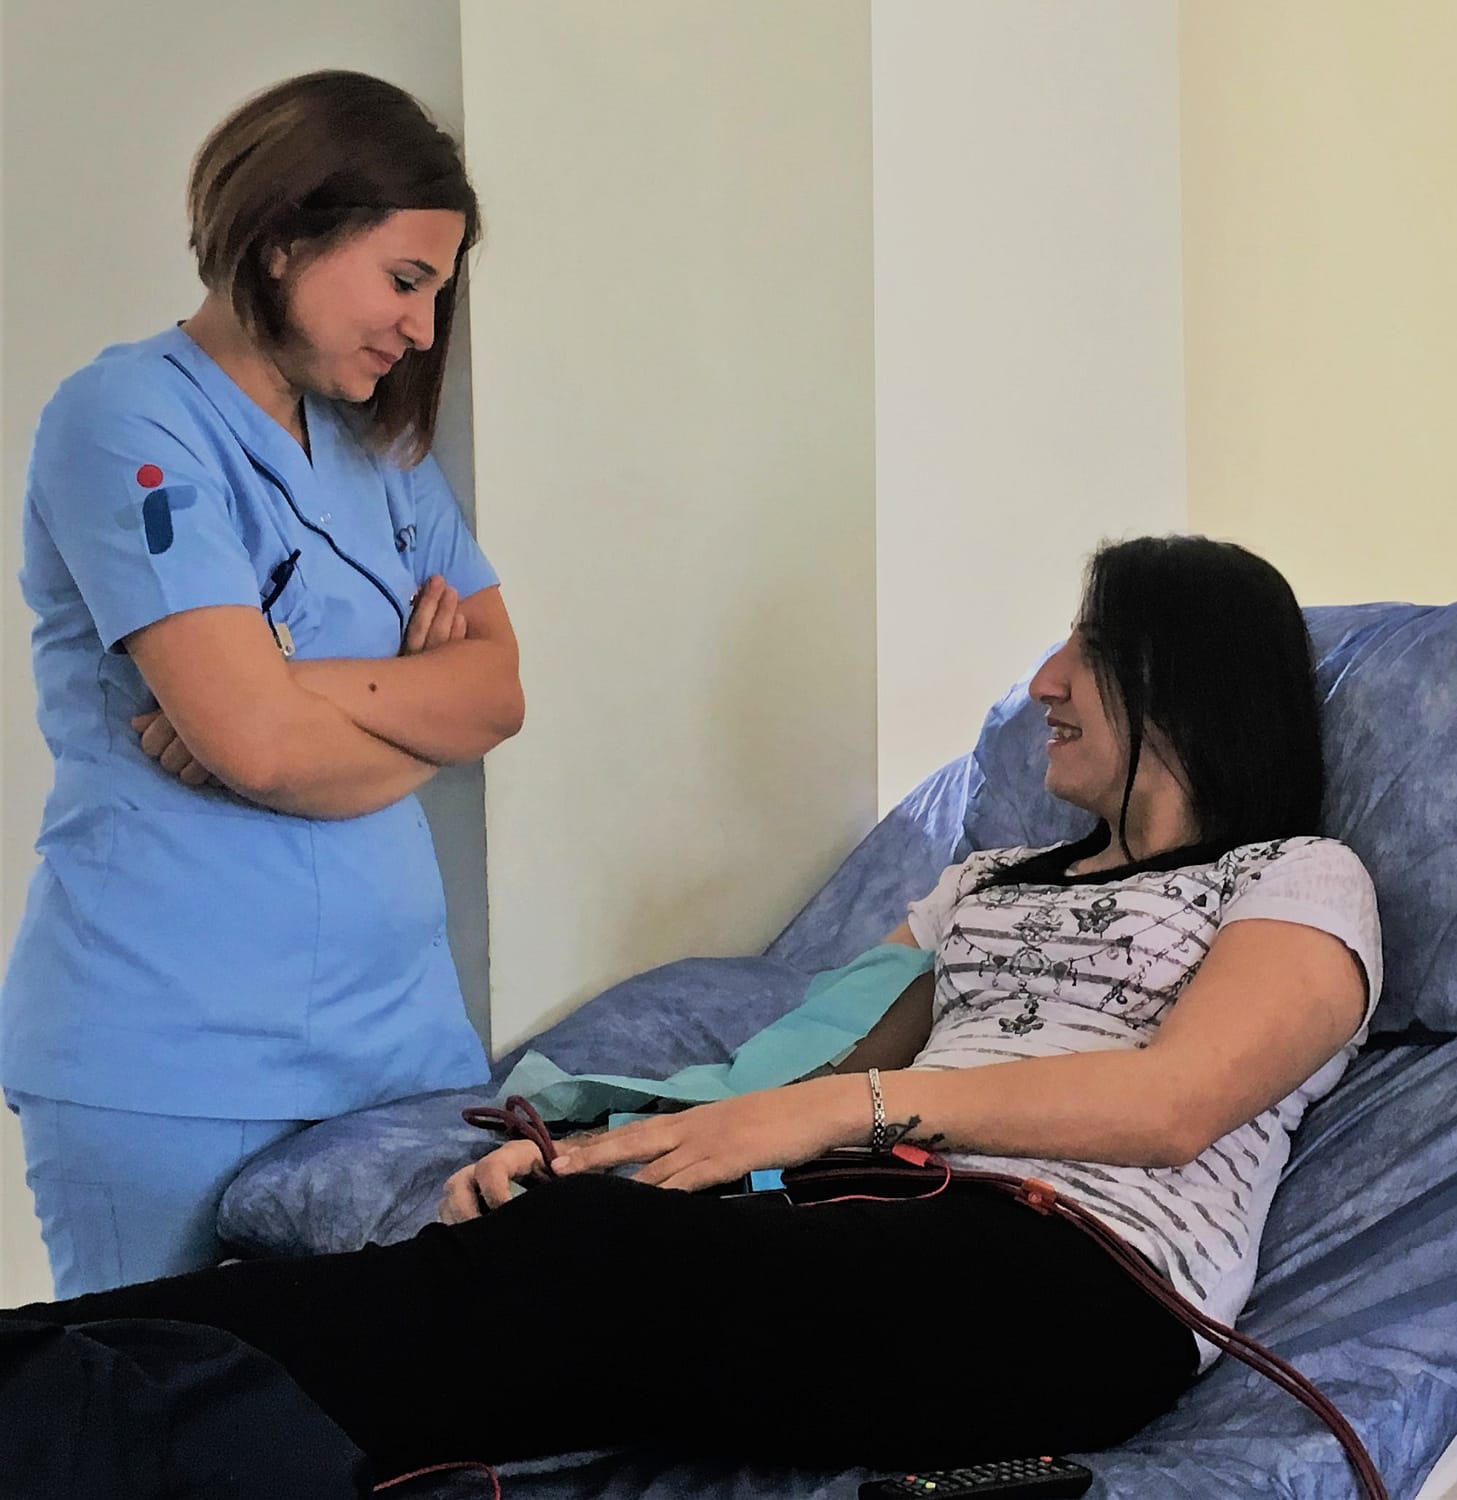 Hilal, a dialysis patient being treated by a nurse working at D.med healthcare.